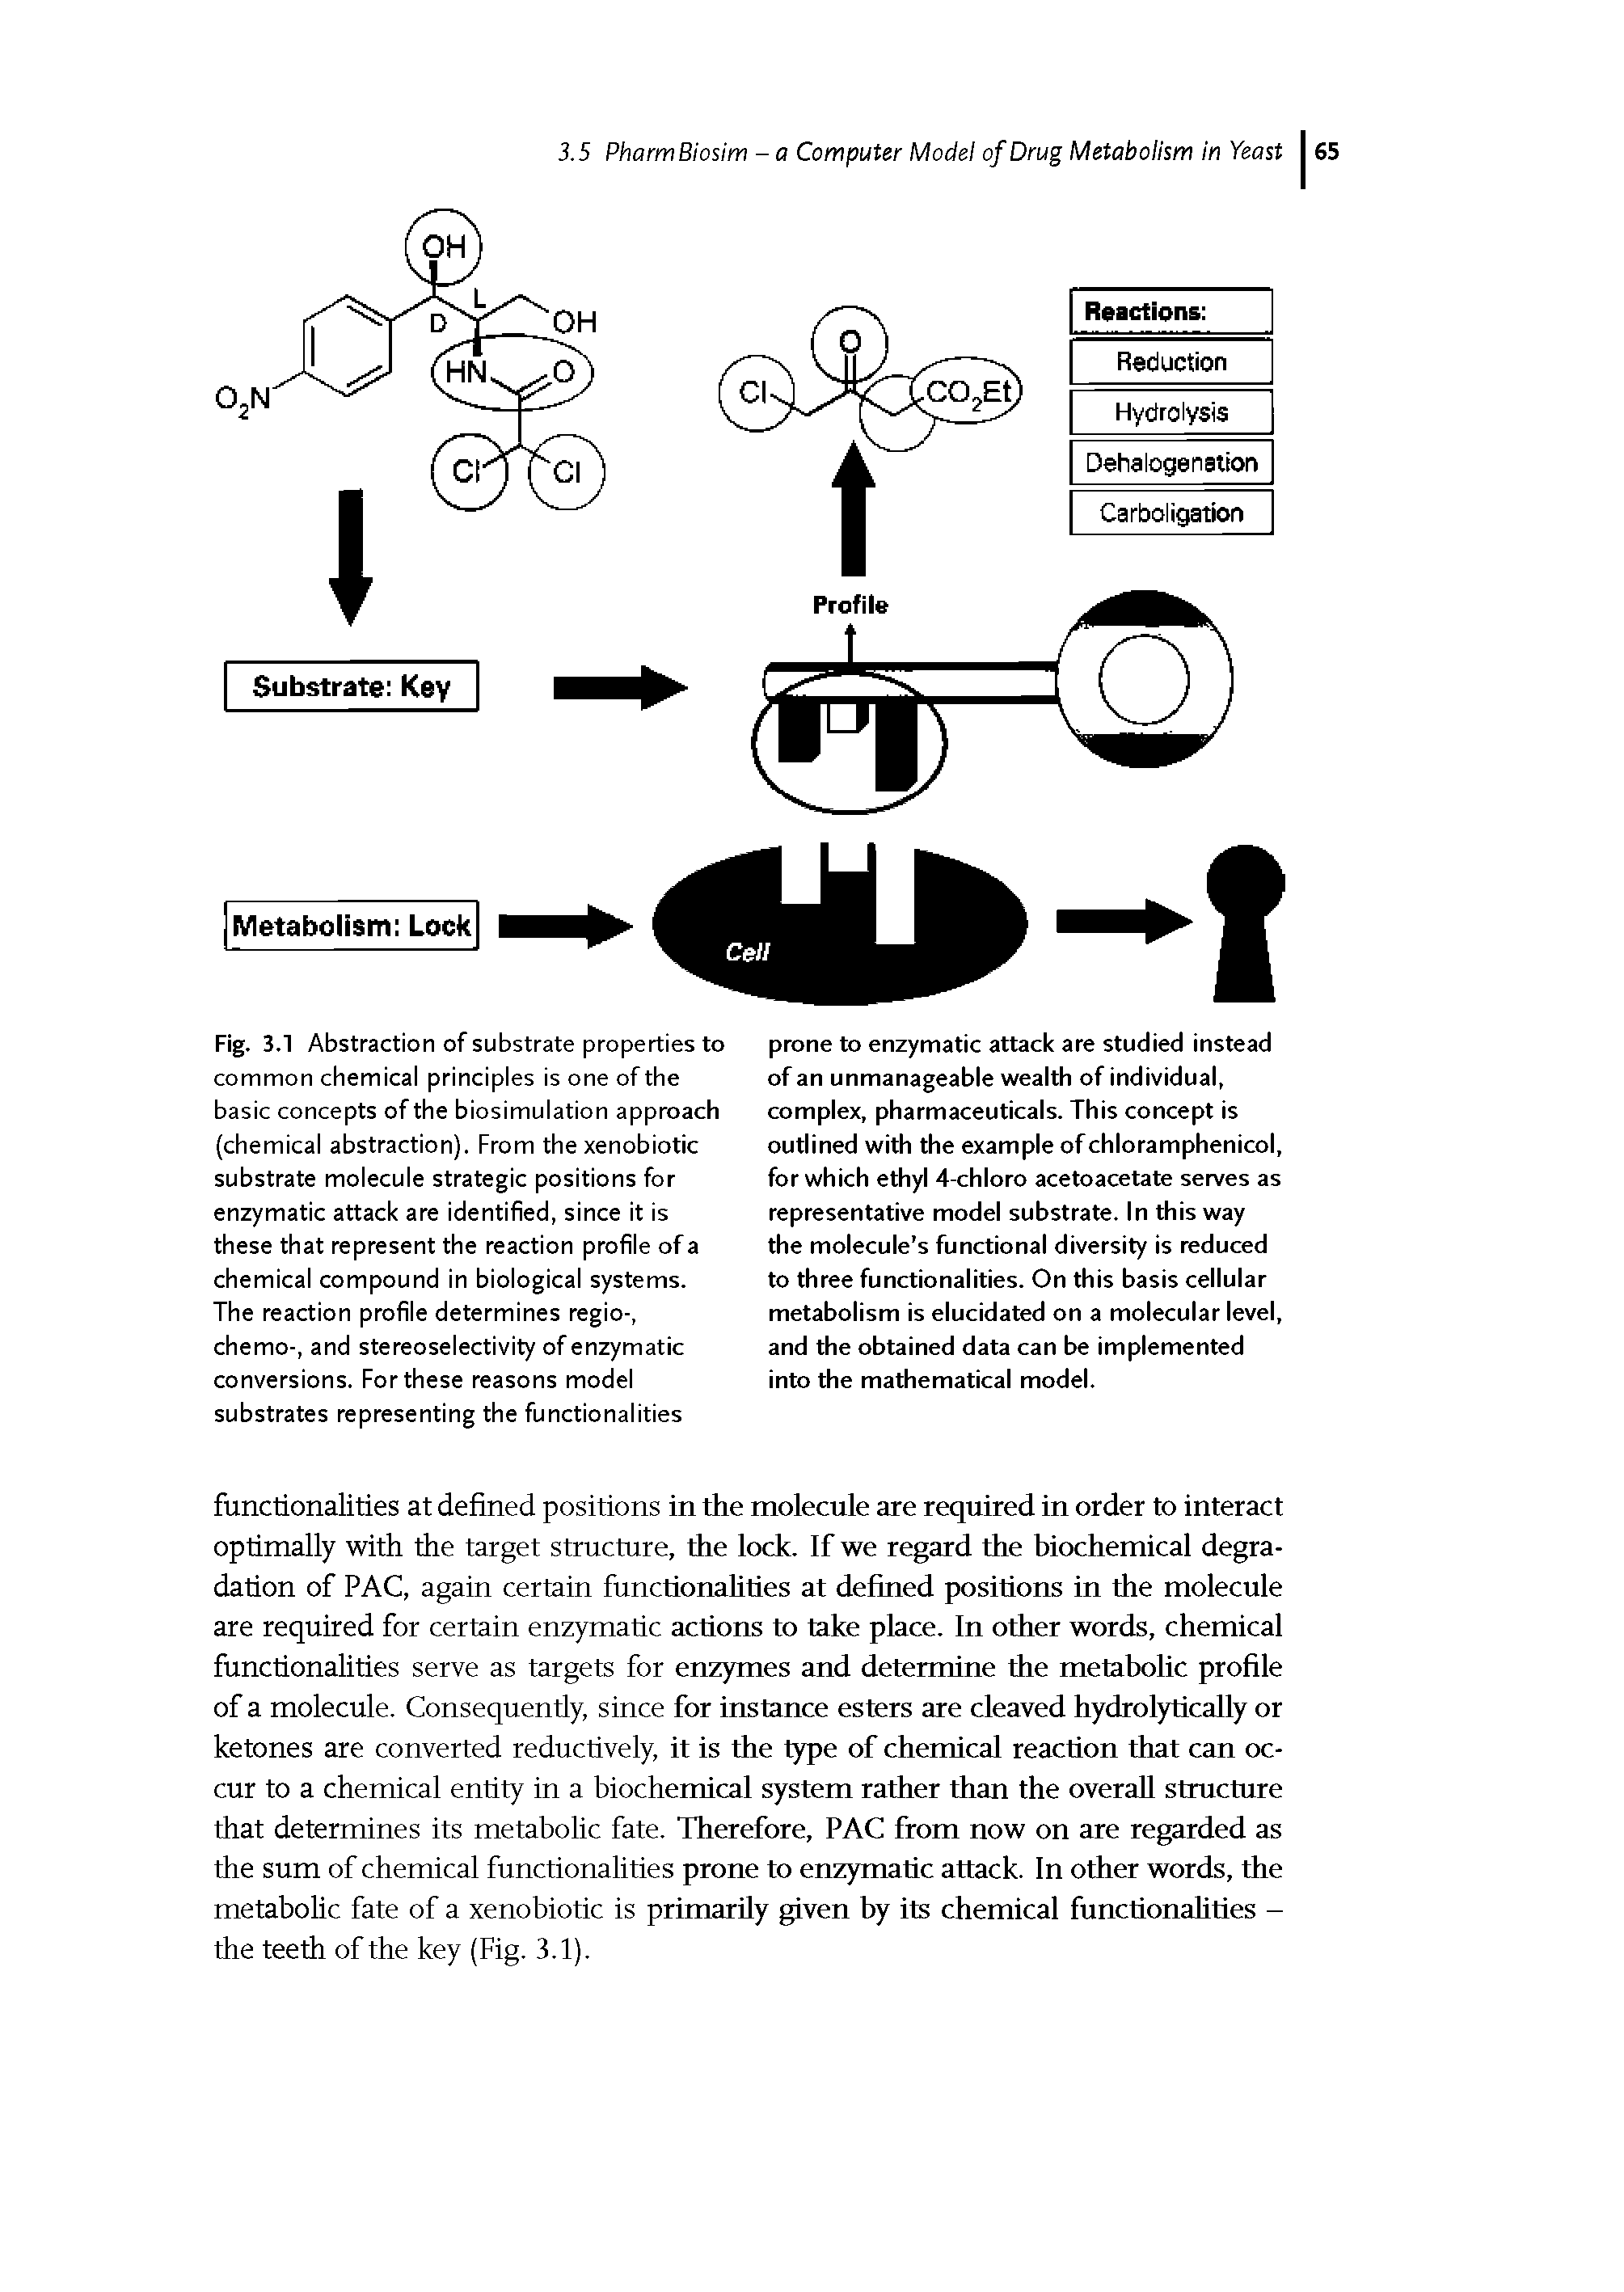 Fig. 3.1 Abstraction of substrate properties to common chemical principles is one of the basic concepts of the biosimulation approach (chemical abstraction). From the xenobiotic substrate molecule strategic positions for enzymatic attack are identified, since it is these that represent the reaction profile of a chemical compound in biological systems. The reaction profile determines regio-, chemo-, and stereoselectivity of enzymatic conversions. For these reasons model substrates representing the functionalities...